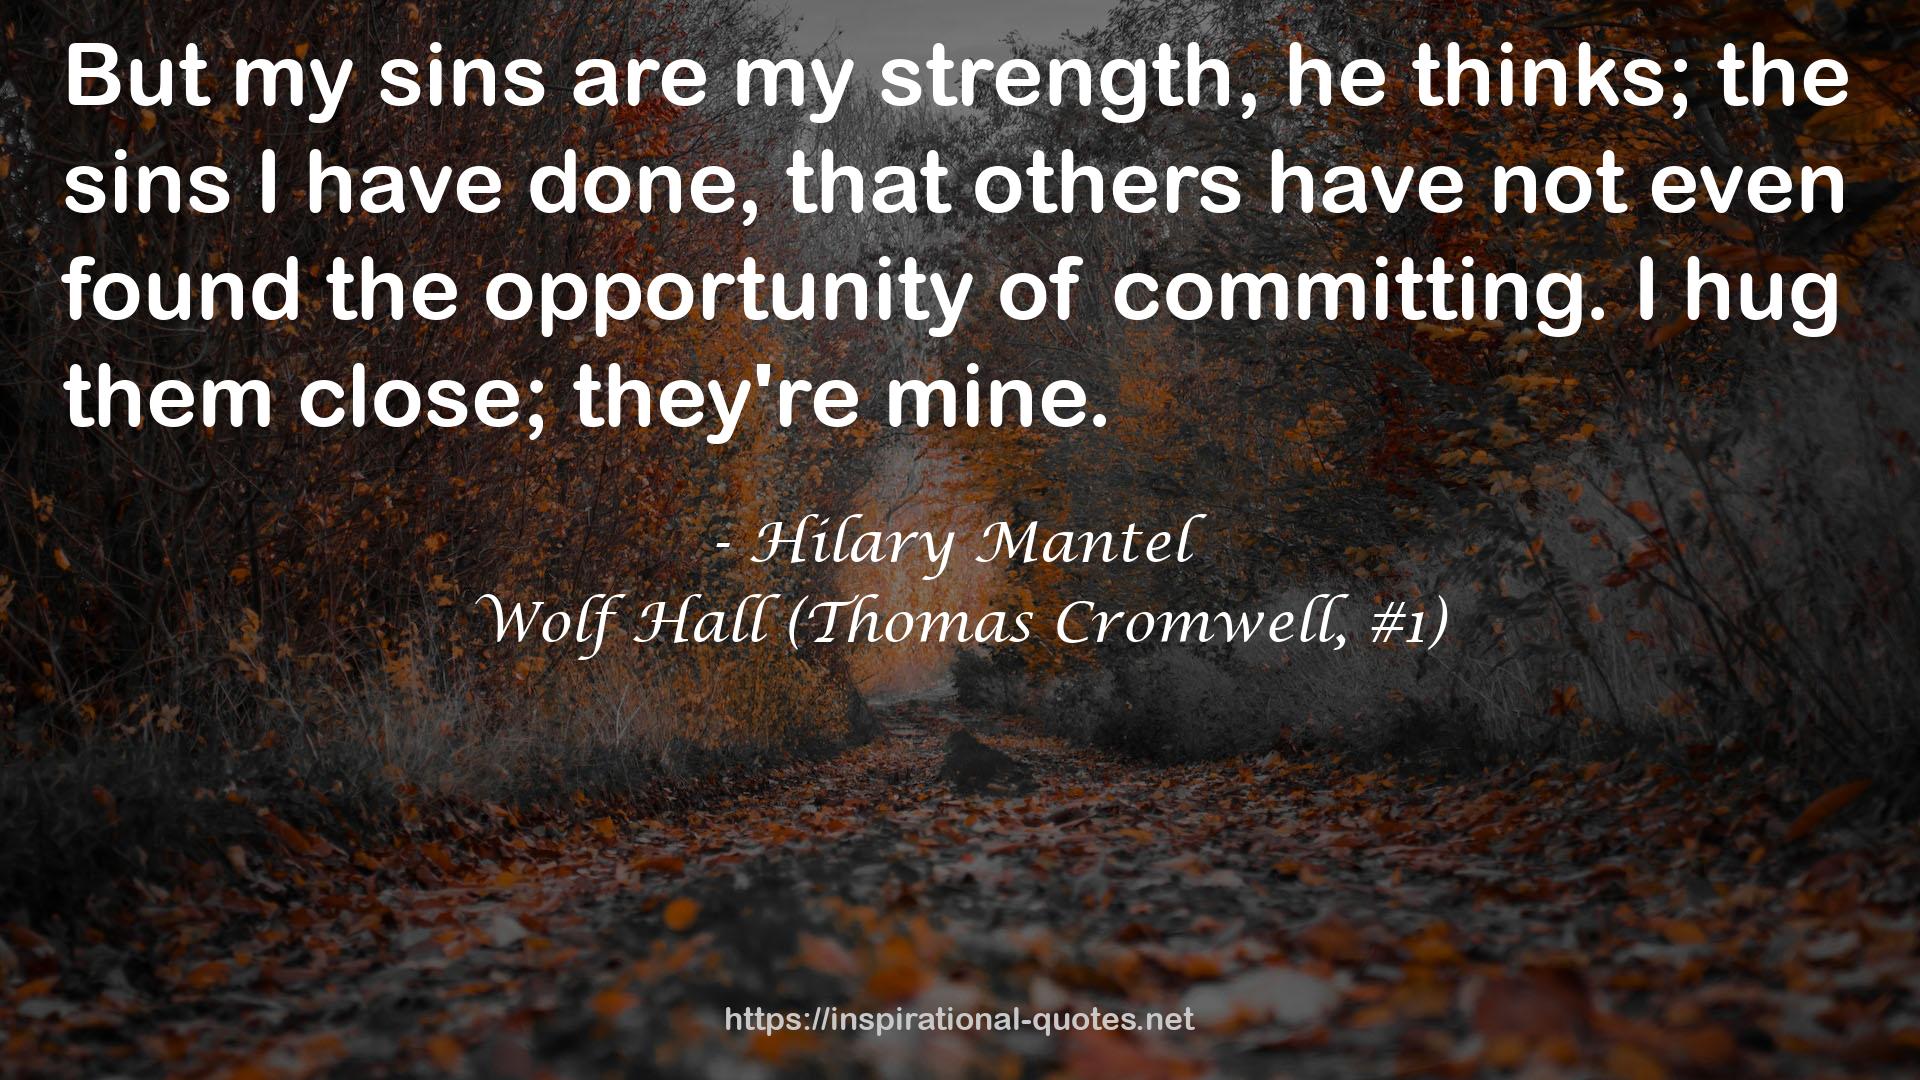 Wolf Hall (Thomas Cromwell, #1) QUOTES